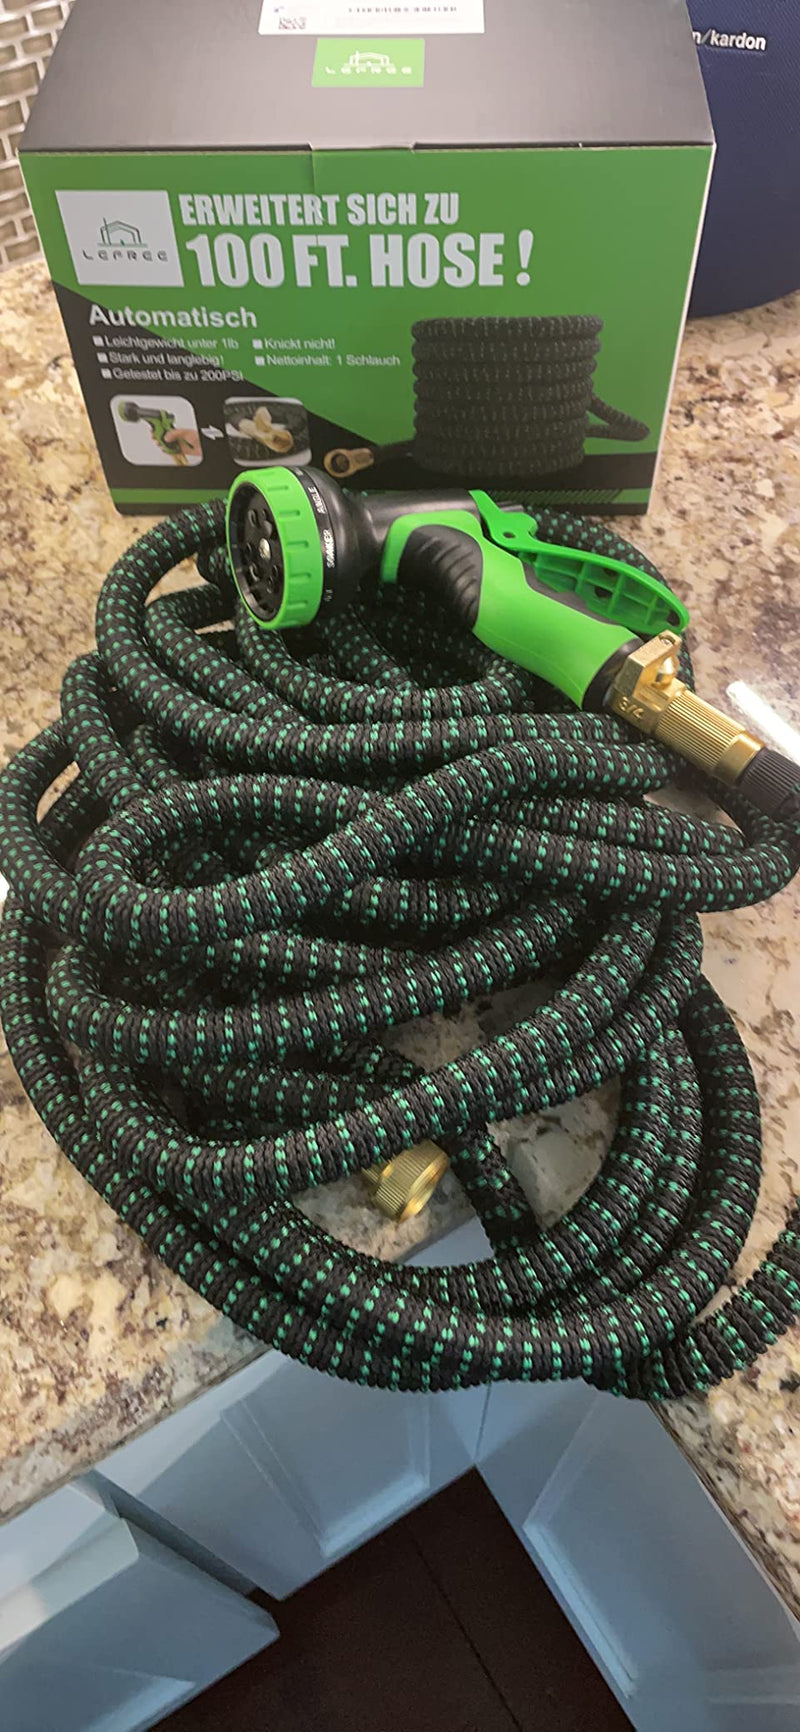 LeFree 100ft Expandable Garden Hose Review: Is it Worth Buying?